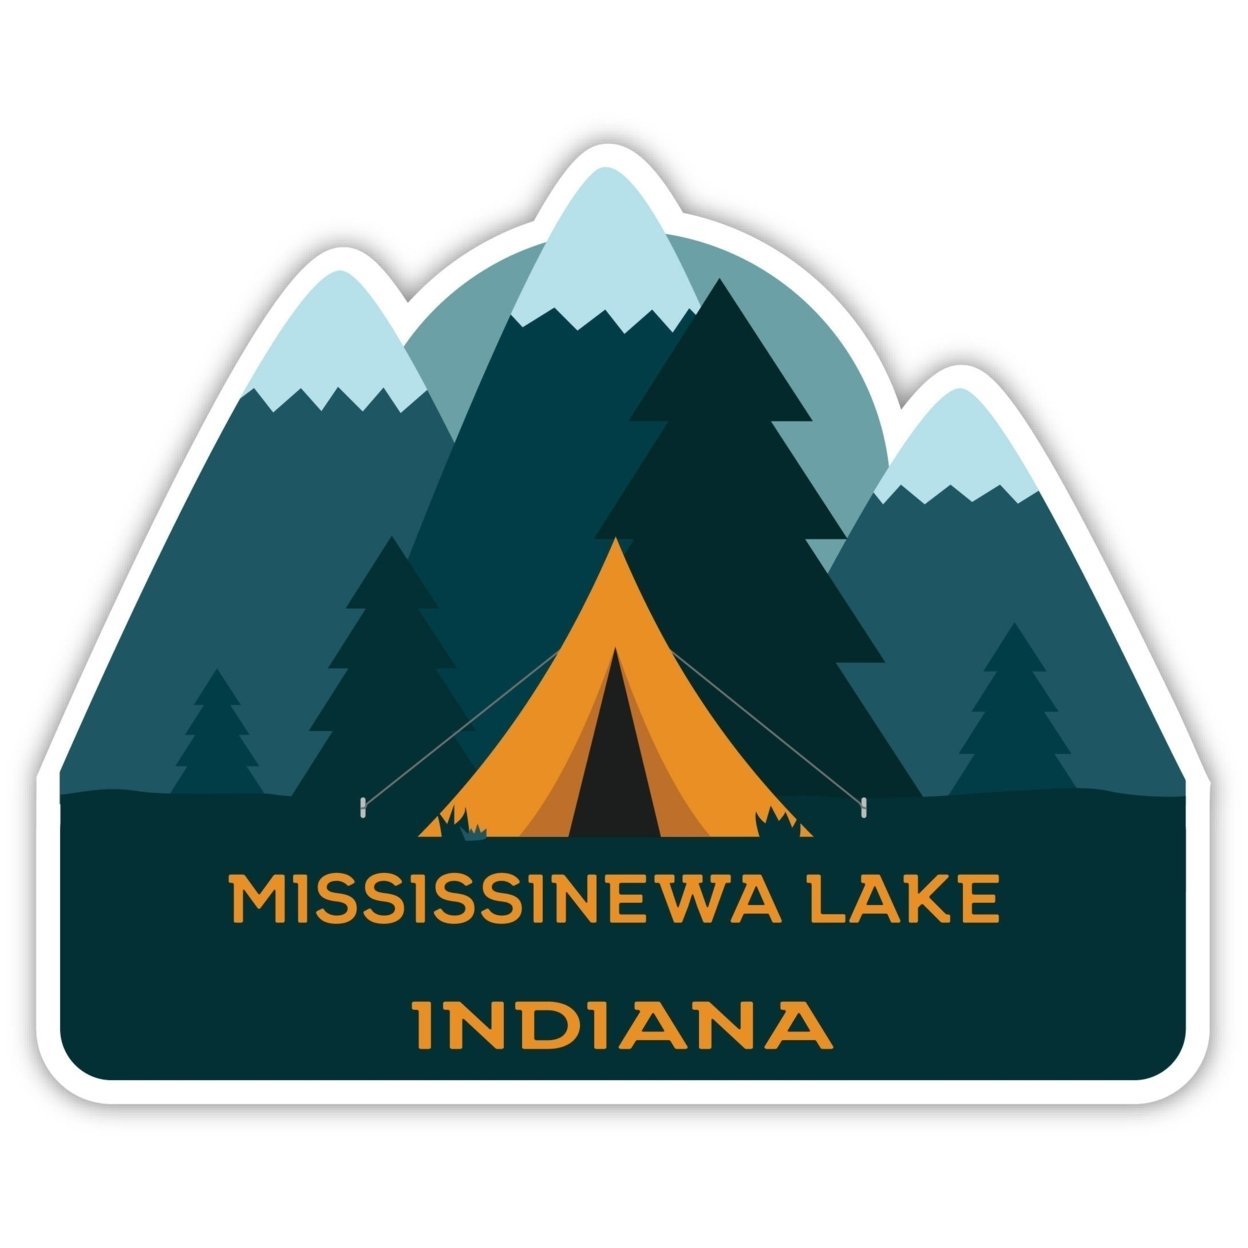 Mississinewa Lake Indiana Souvenir Decorative Stickers (Choose Theme And Size) - 4-Inch, Tent